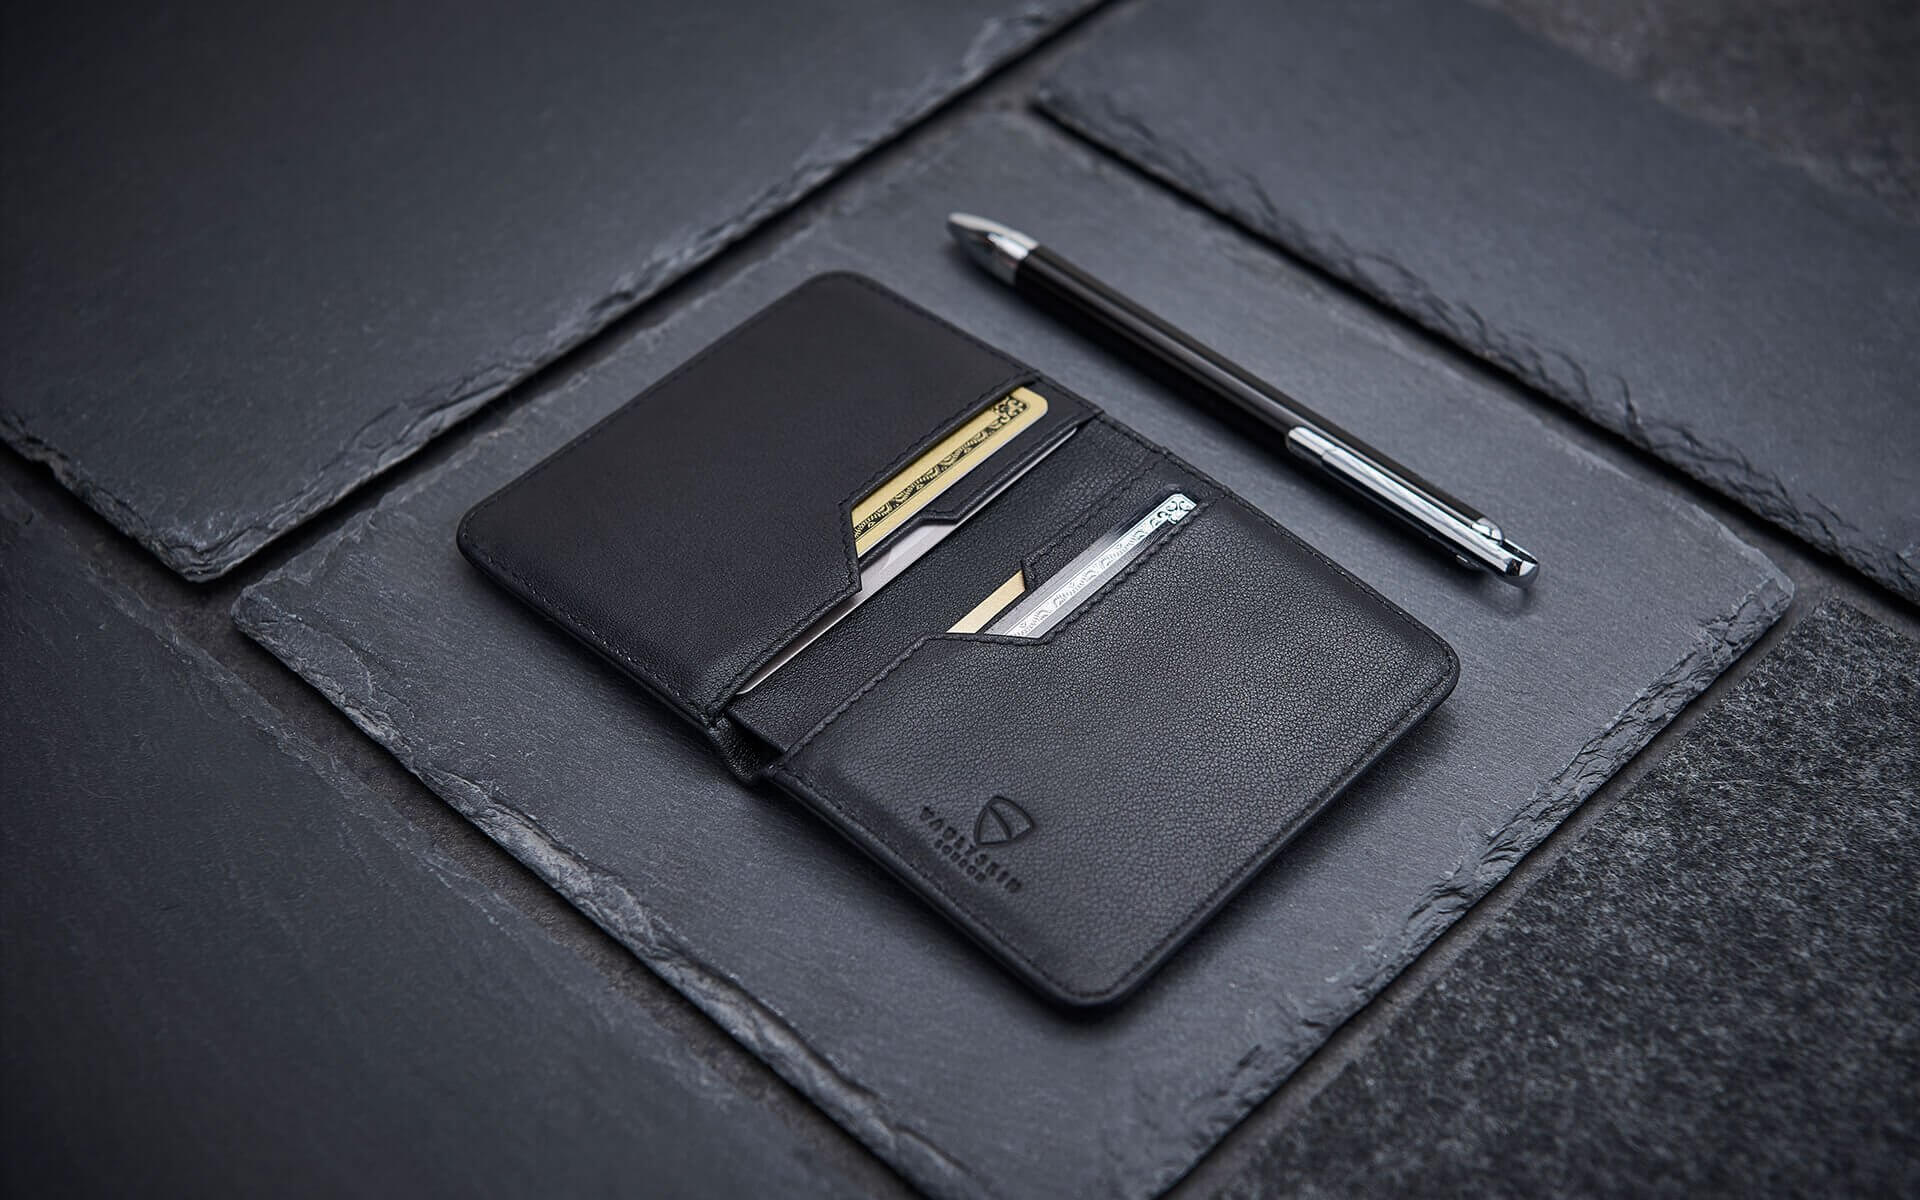 Vaultskin CITY RFID-blocking wallet showcased in a sleek, modern setting, highlighting its slim and minimalist design ideal for the contemporary user.